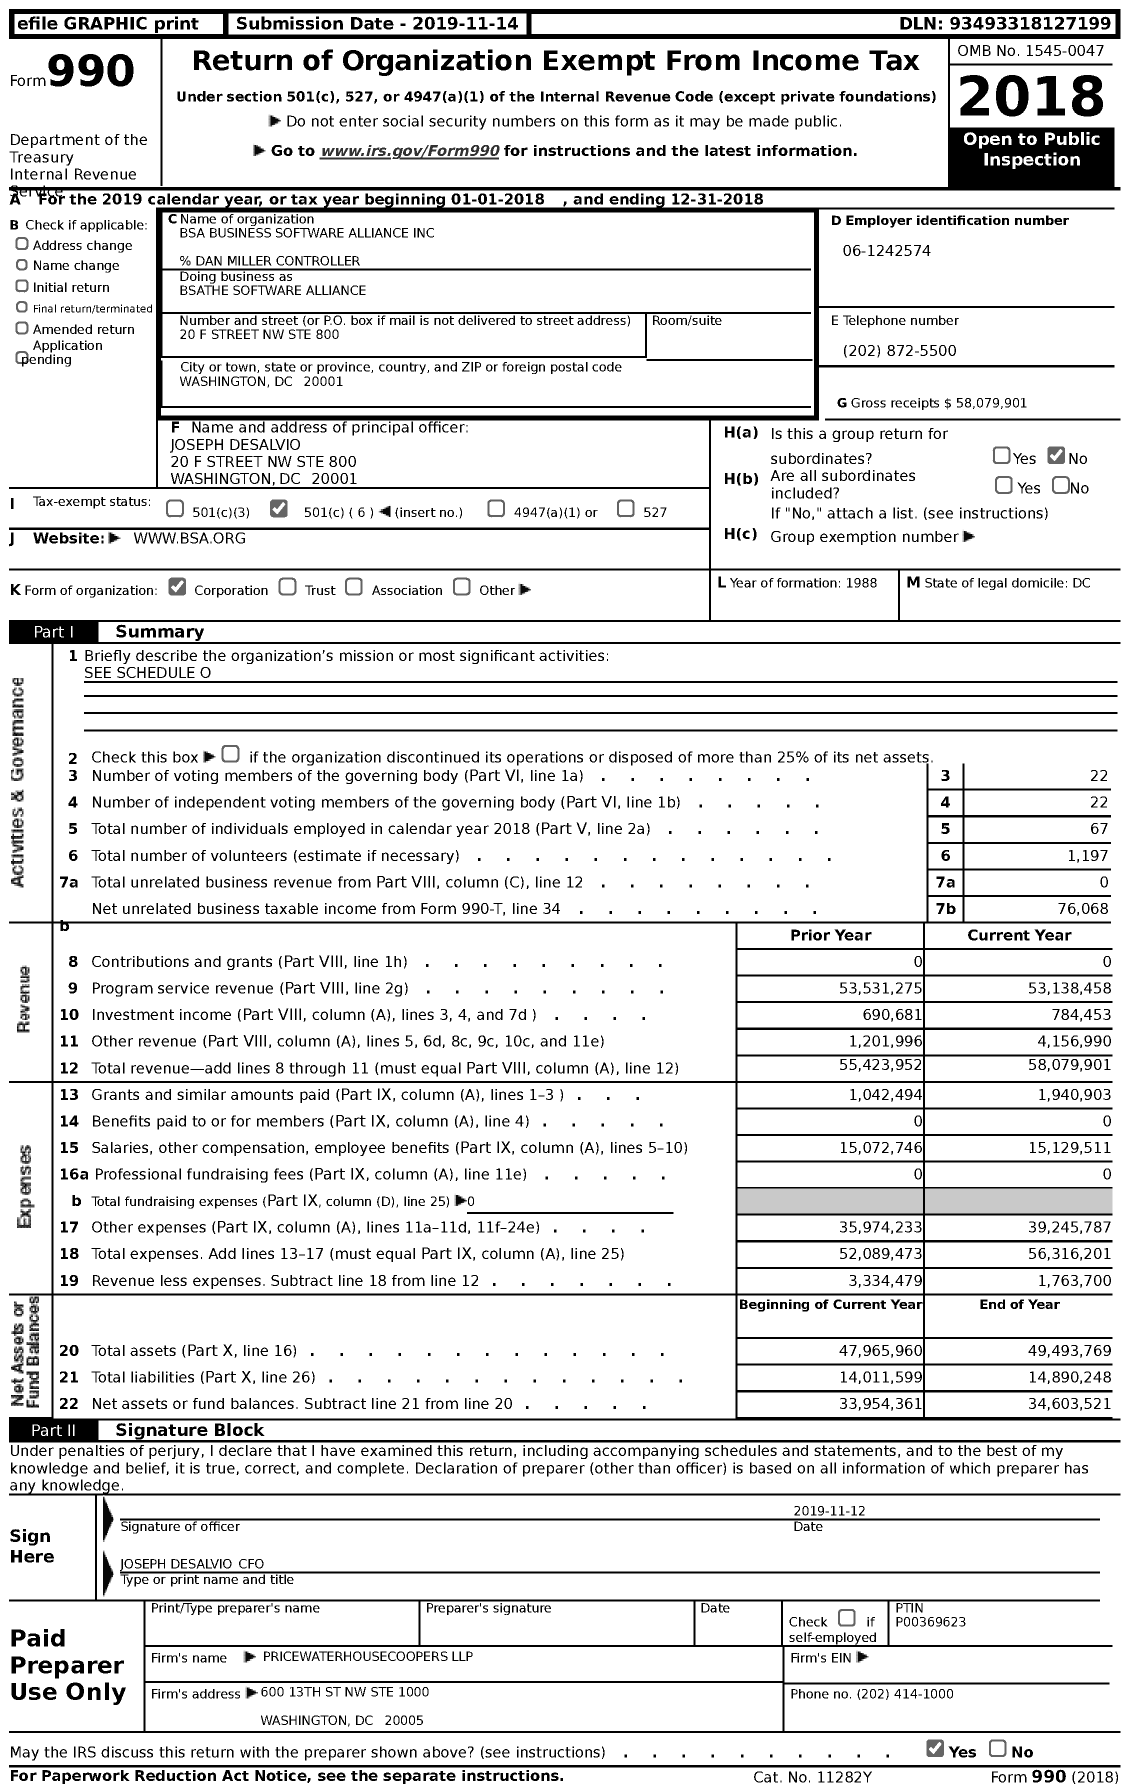 Image of first page of 2018 Form 990 for Bsa the Software Alliance (BSA)